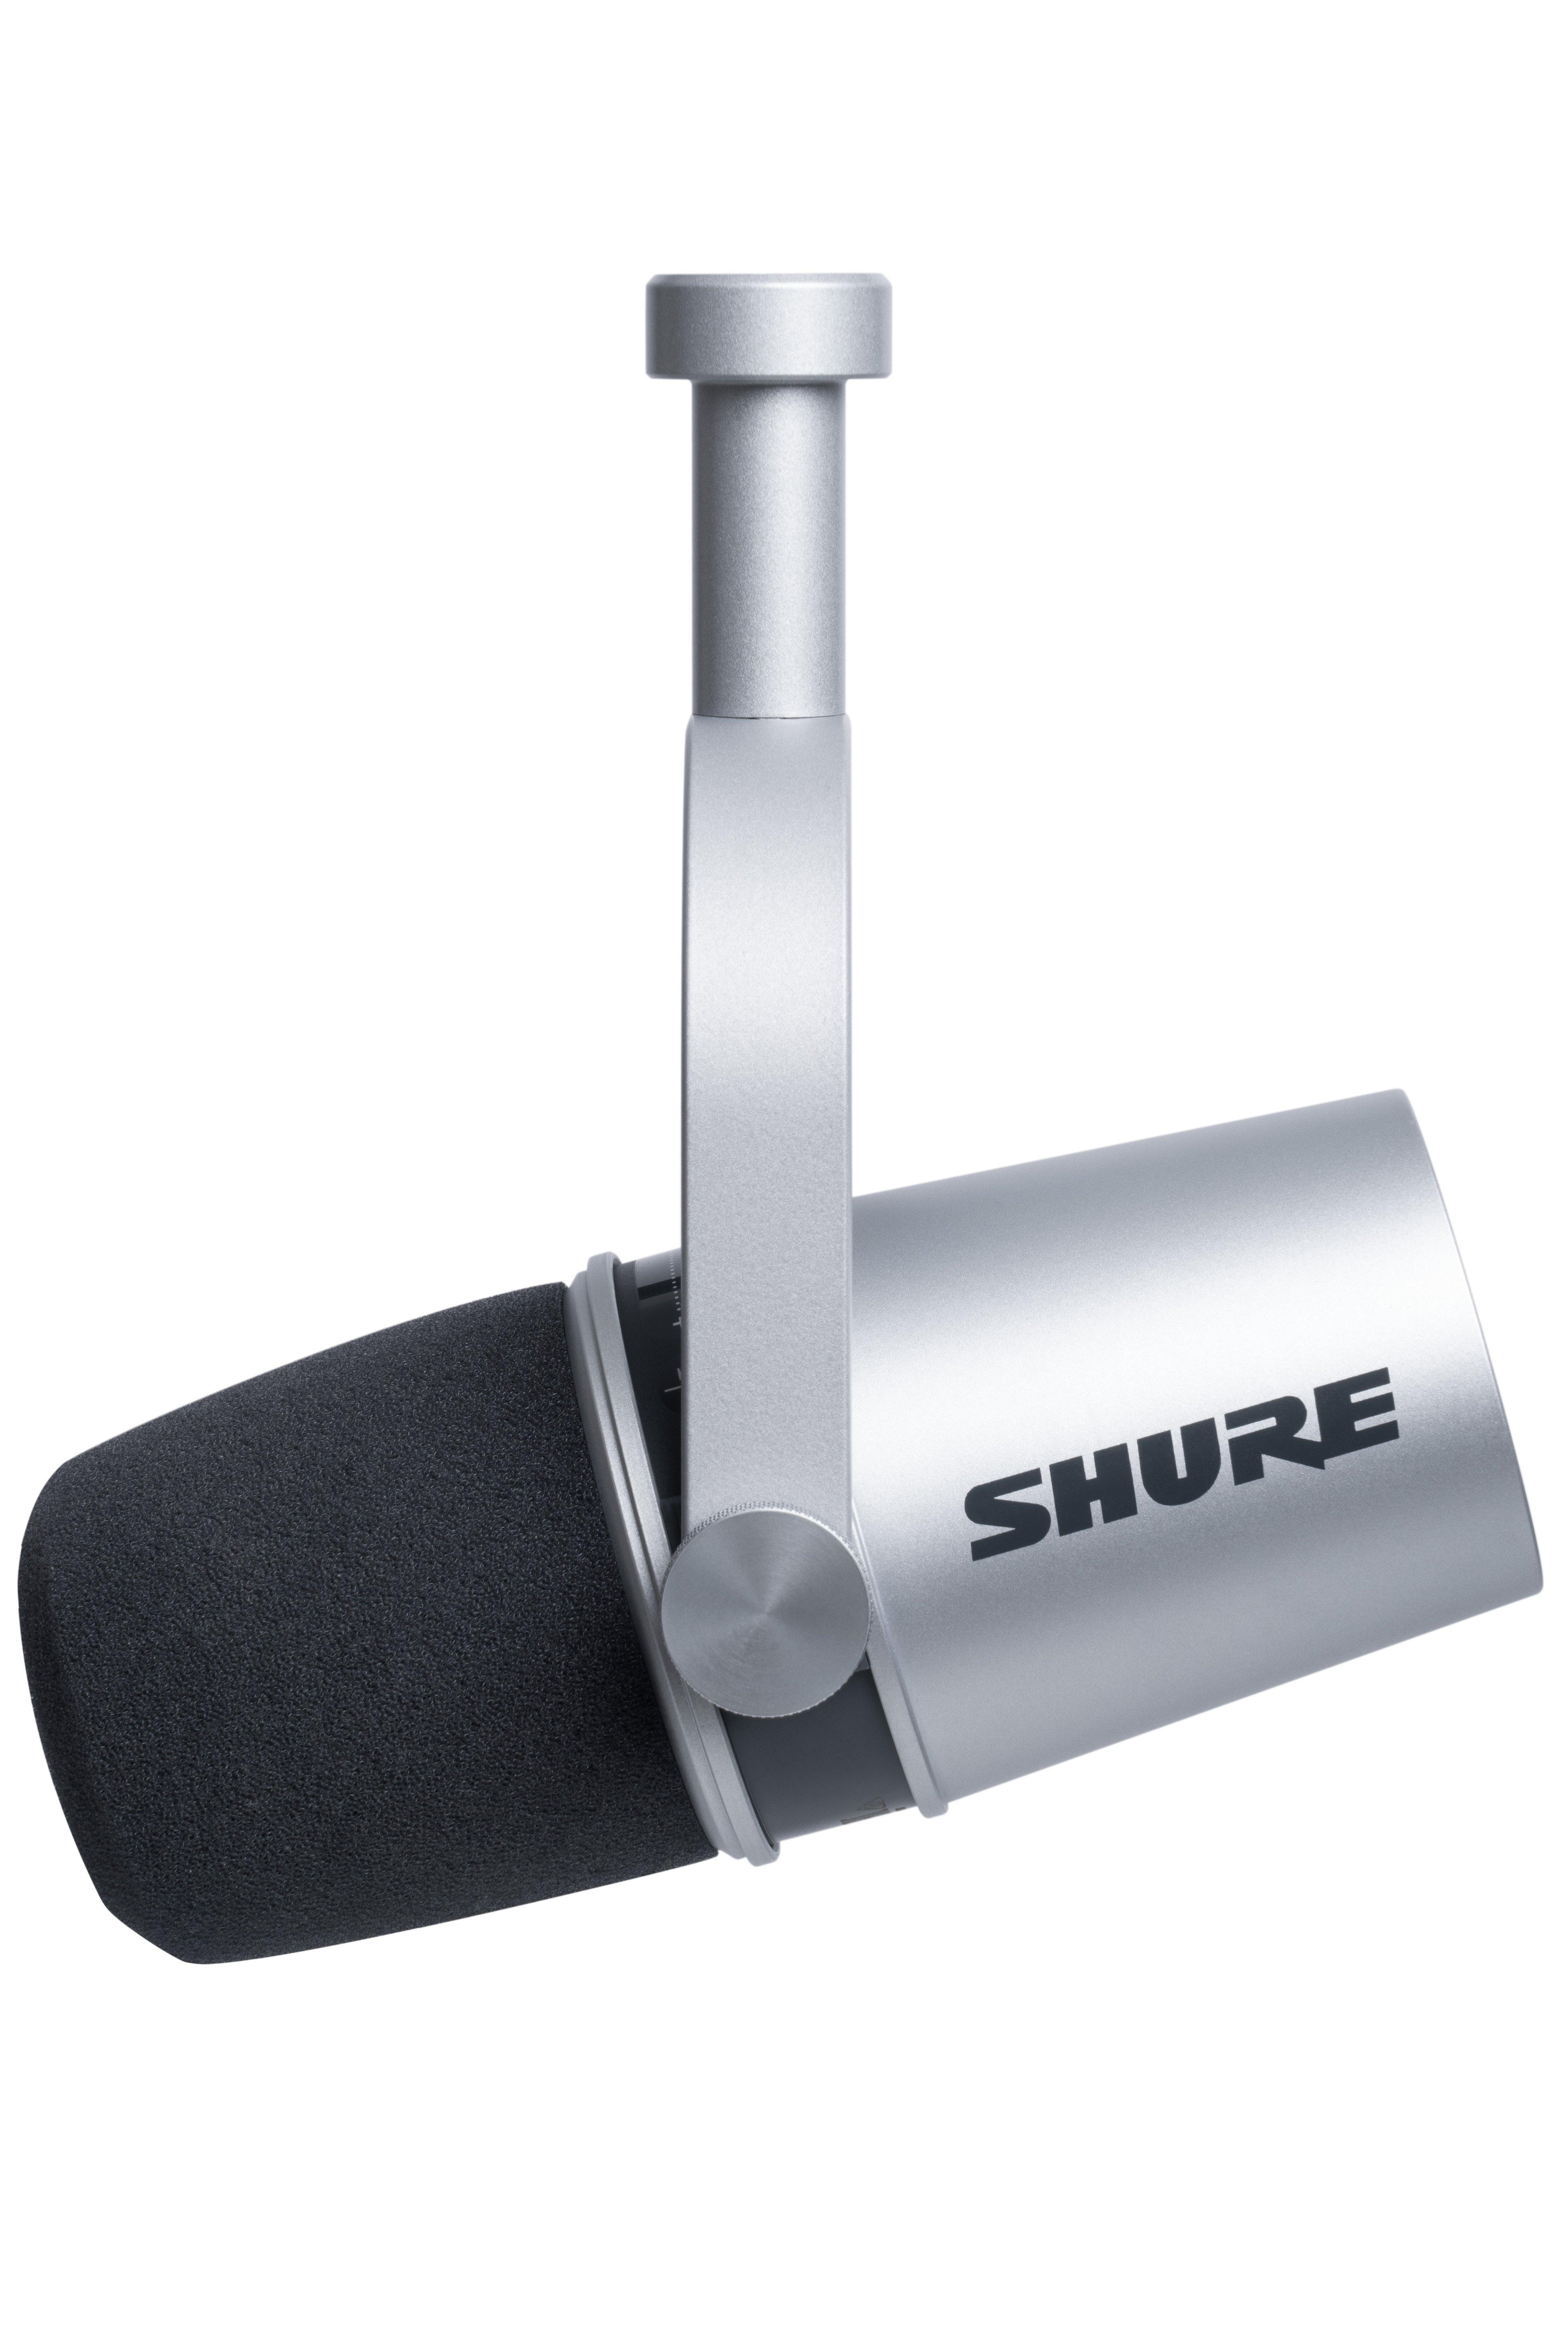 list item 3 of 7 Shure MV7 Dynamic Podcast Microphone with USB and XLR Output